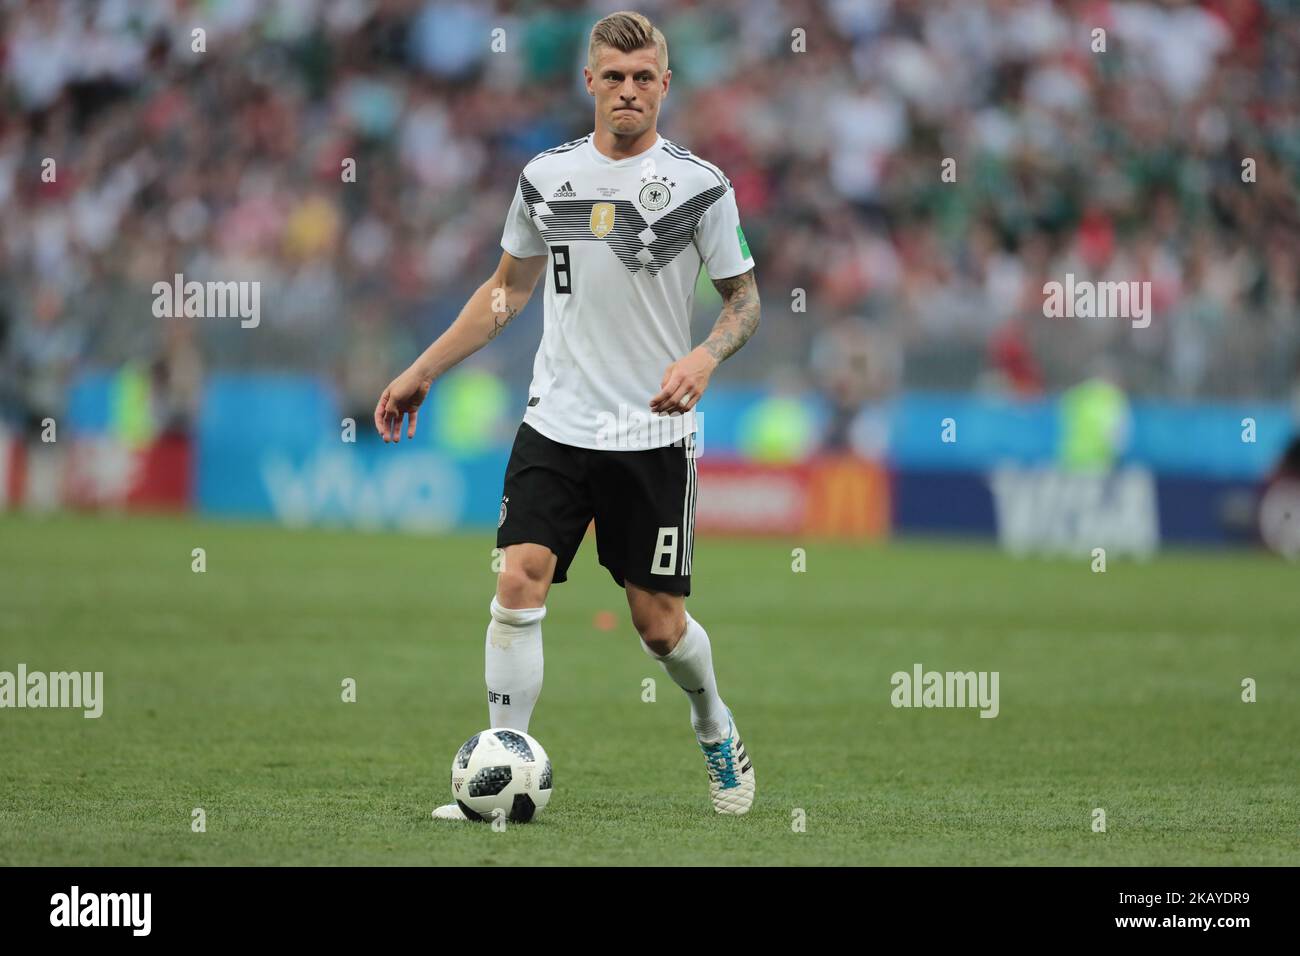 midfielder Toni Kroos of Germany National team during a Group F 2018 FIFA World Cup soccer match between Germany and Mexico on June 16, 2018, at the Kazan Arena in Kazan, Russia. (Photo by Anatolij Medved/NurPhoto) Stock Photo